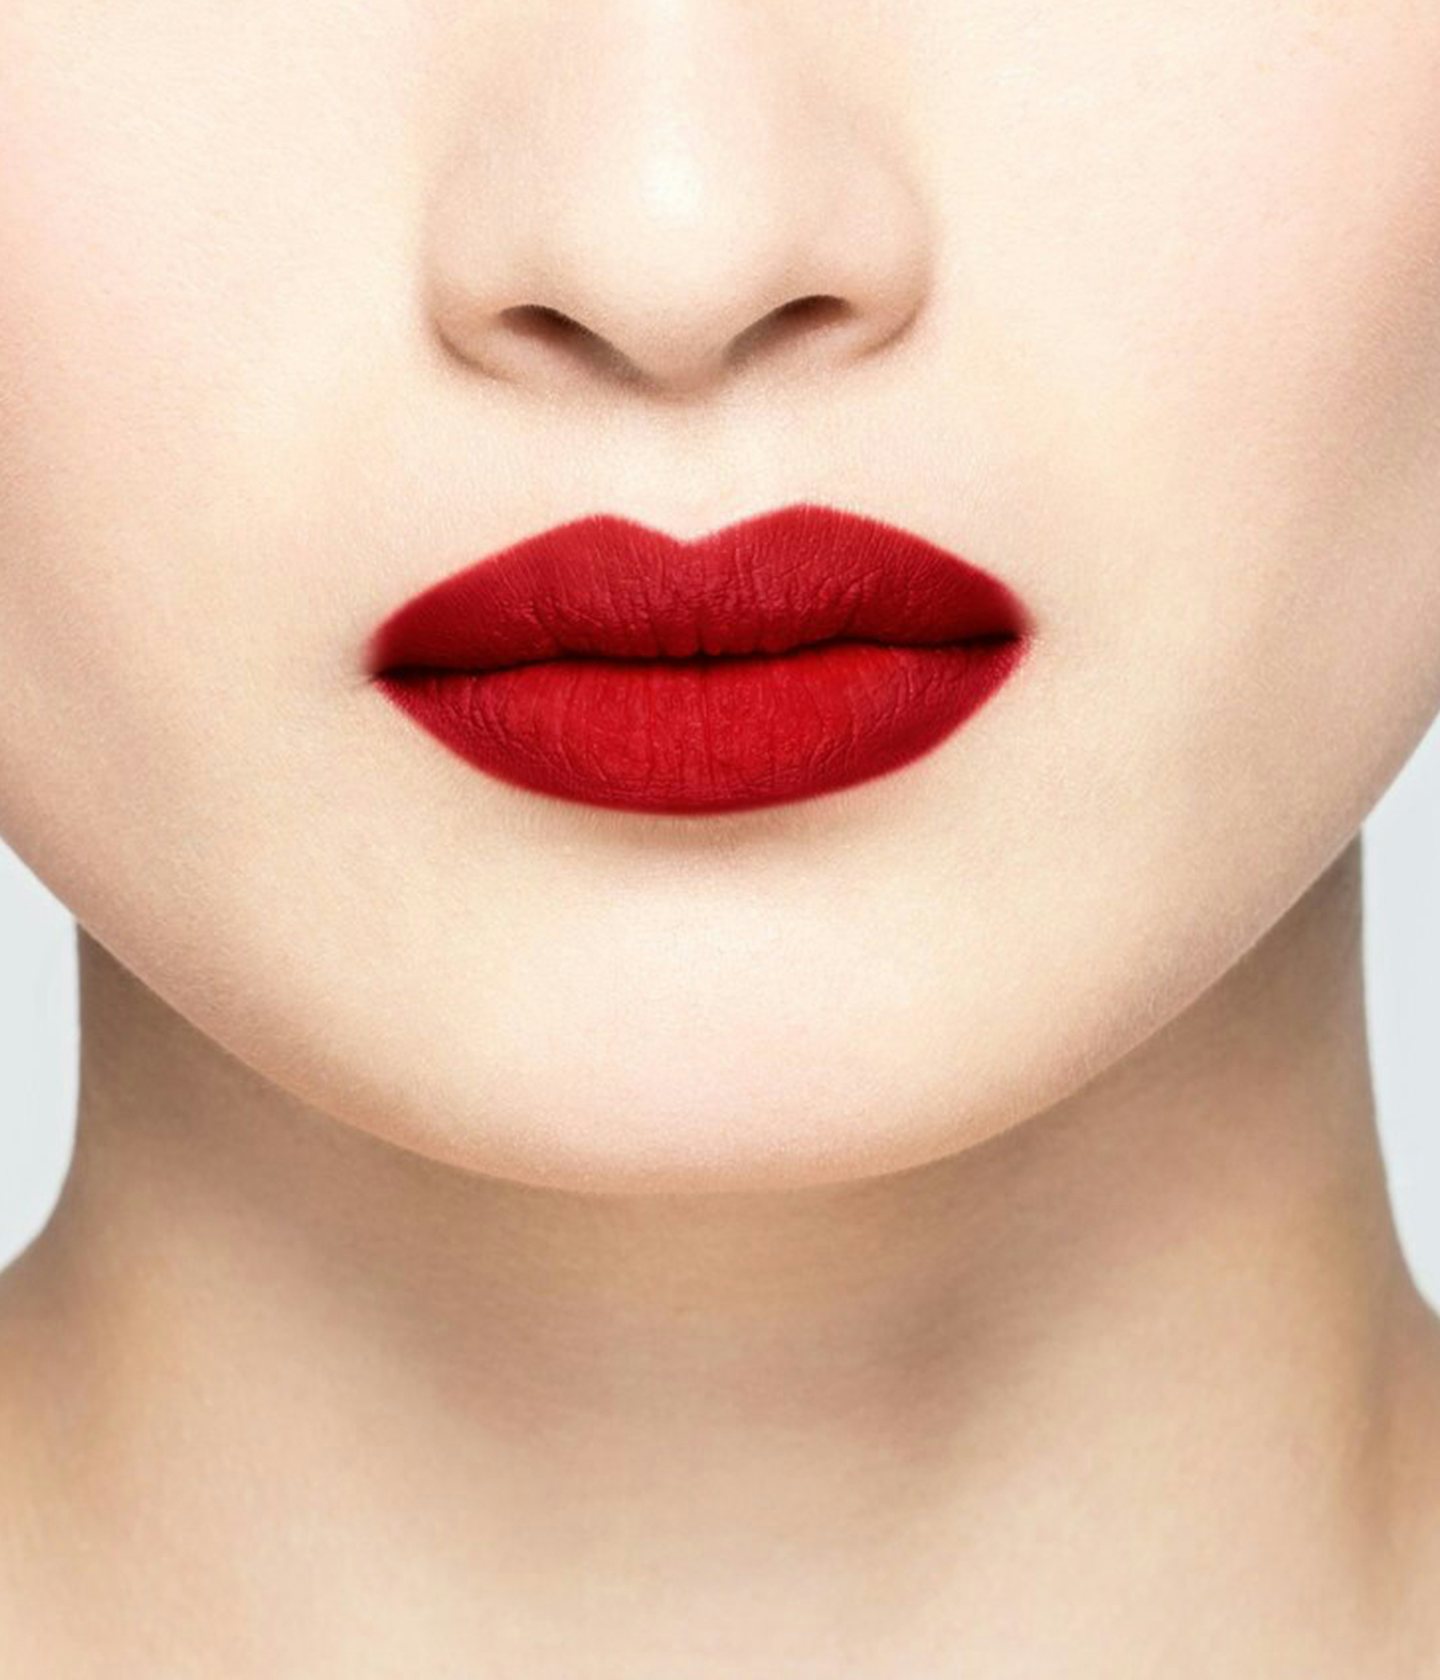 La bouche rouge Pop Art Red shade on the lips of an Asian model